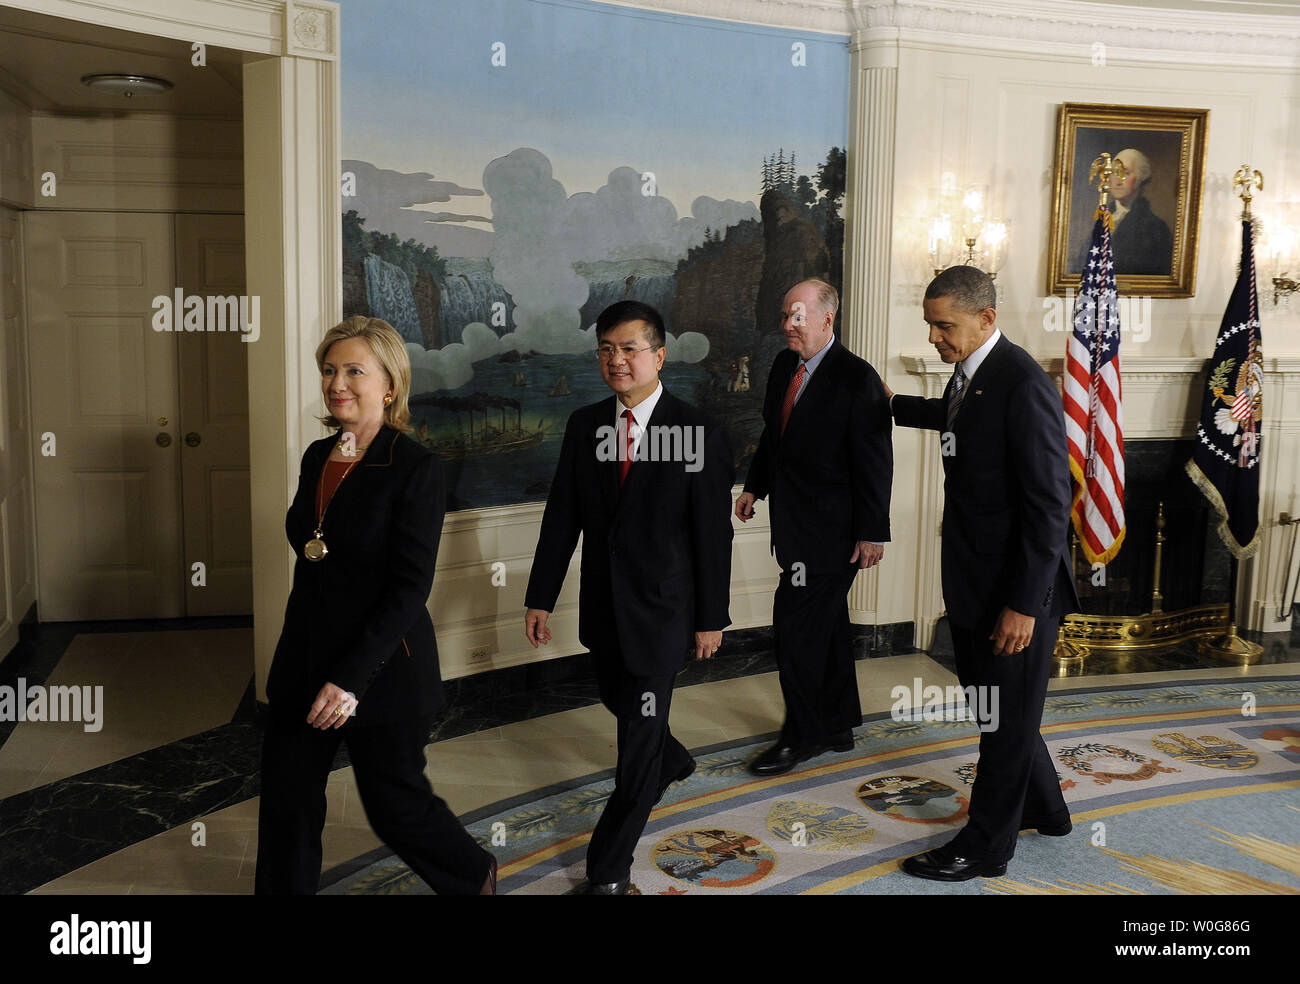 Secretary of State Hillary Rodham Clinton, Secretary of Commerce Gary F. Locke, National Security Advisor Tom Donilon (L to R) and U.S. President Barack Obama depart after Obama named Locke as his choice as Ambassador to China in the Diplomatic Reception Room of the White House in Washington on March 9, 2011.    UPI/Roger L. Wollenberg. Stock Photo